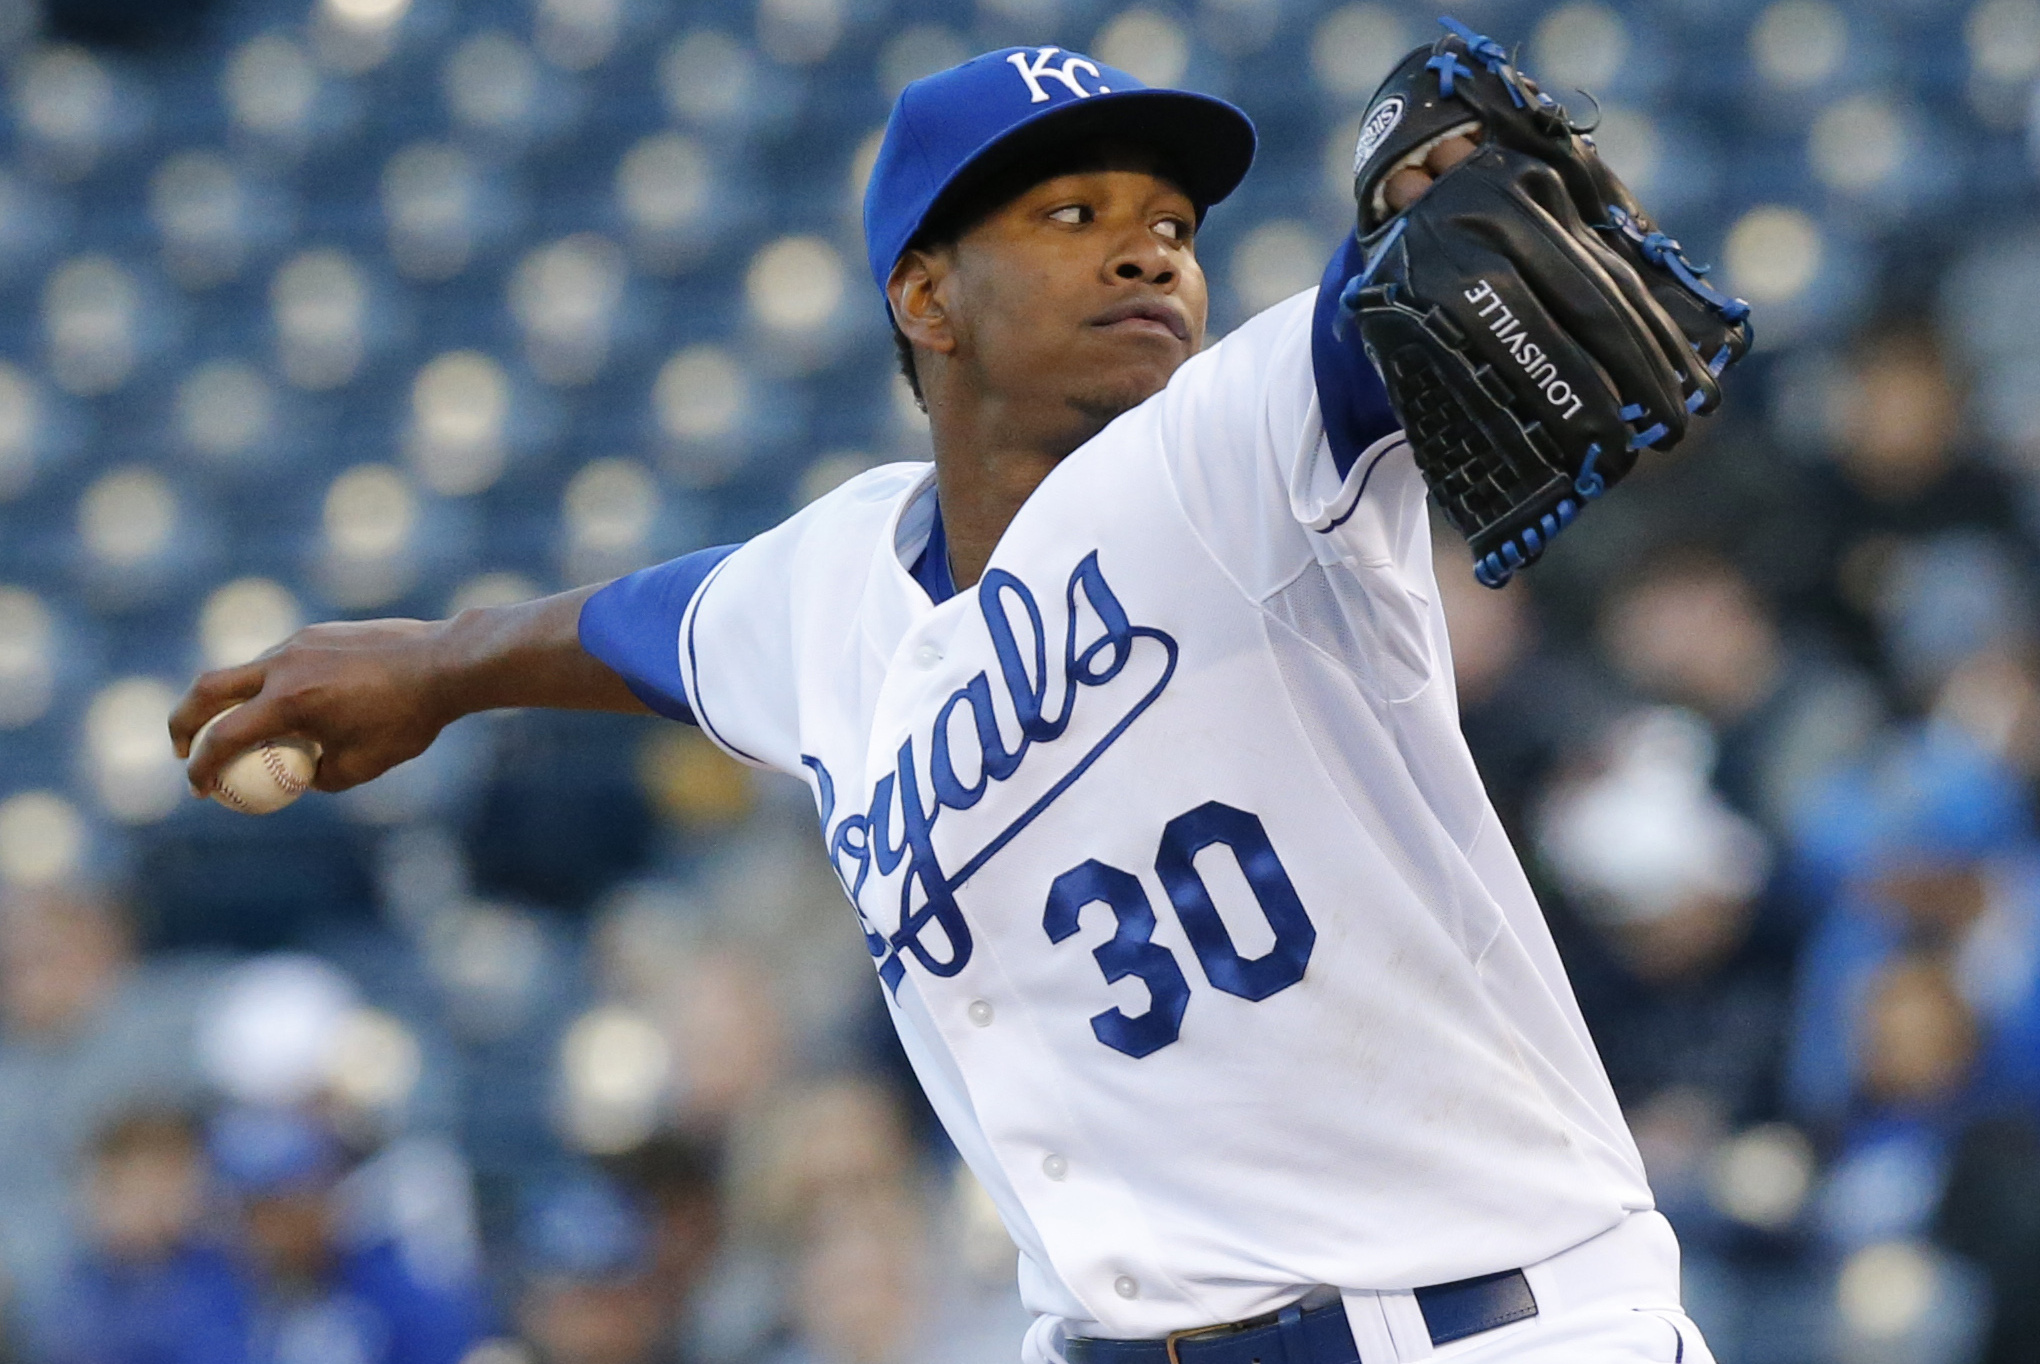 What to watch for in Yordano Ventura's MLB debut - Minor League Ball